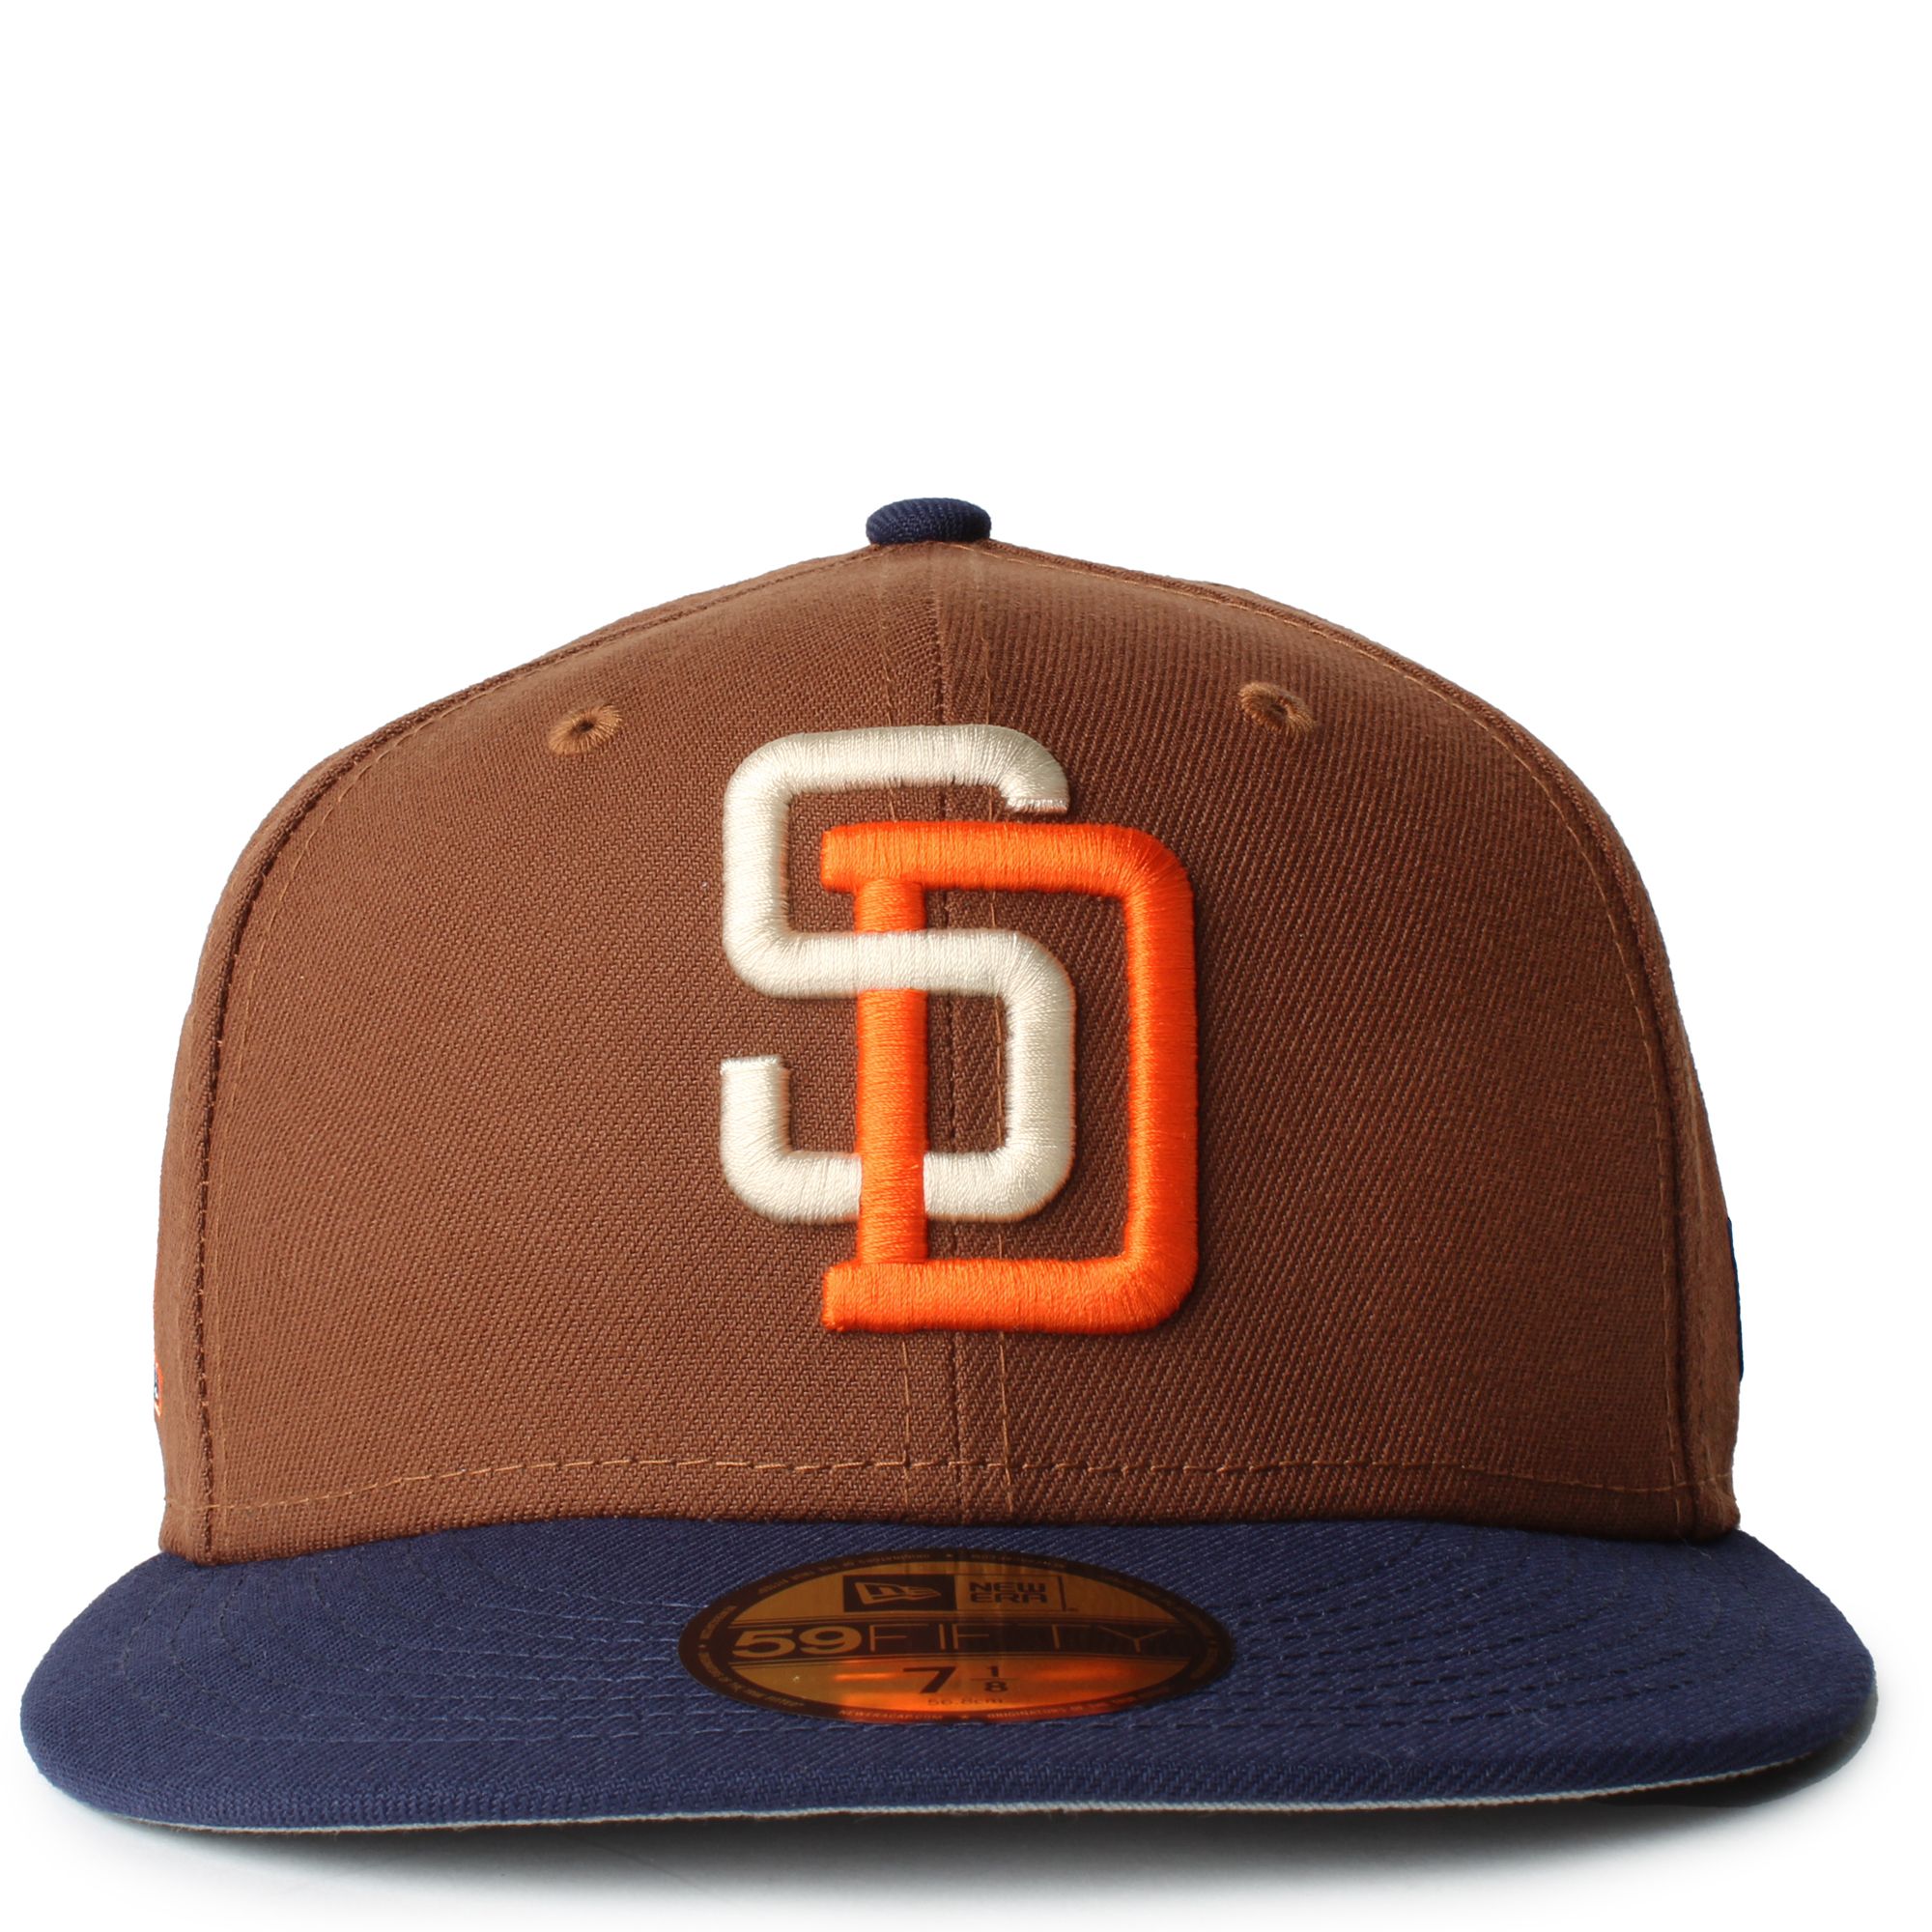 brown san diego padres hat outfit